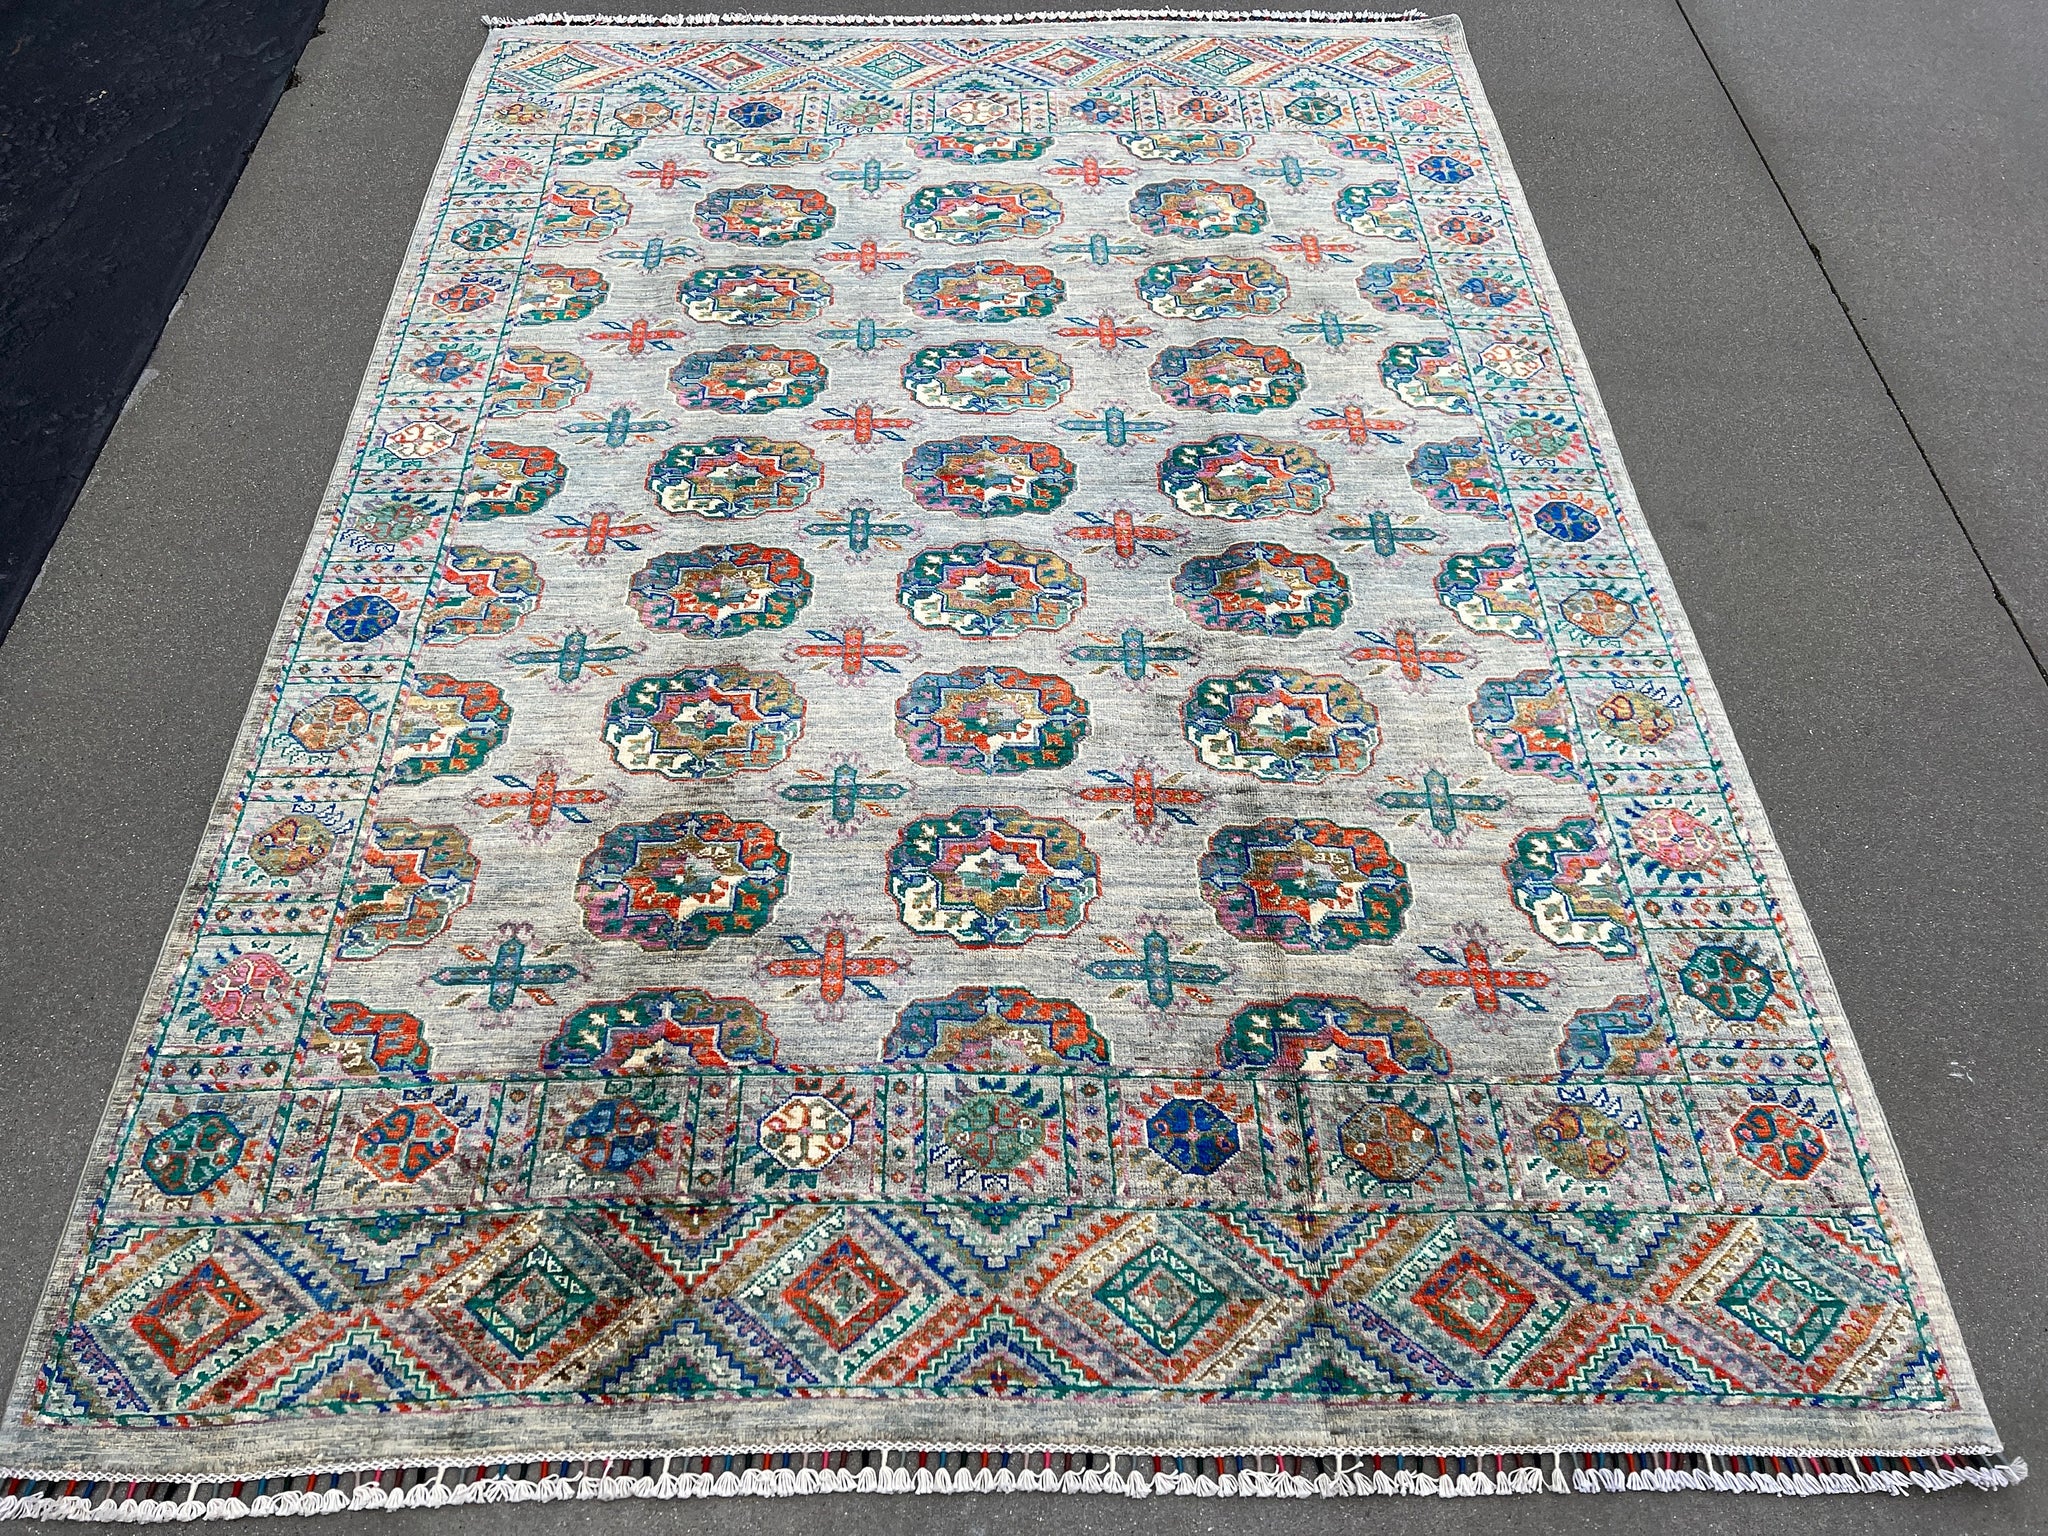 6x8 (180x245) Fair Trade Handmade Afghan Rug | Grey Gray Blue Pink Ivory Orange Teal Yellow Cream Beige Pine Green | Hand Knotted Persian